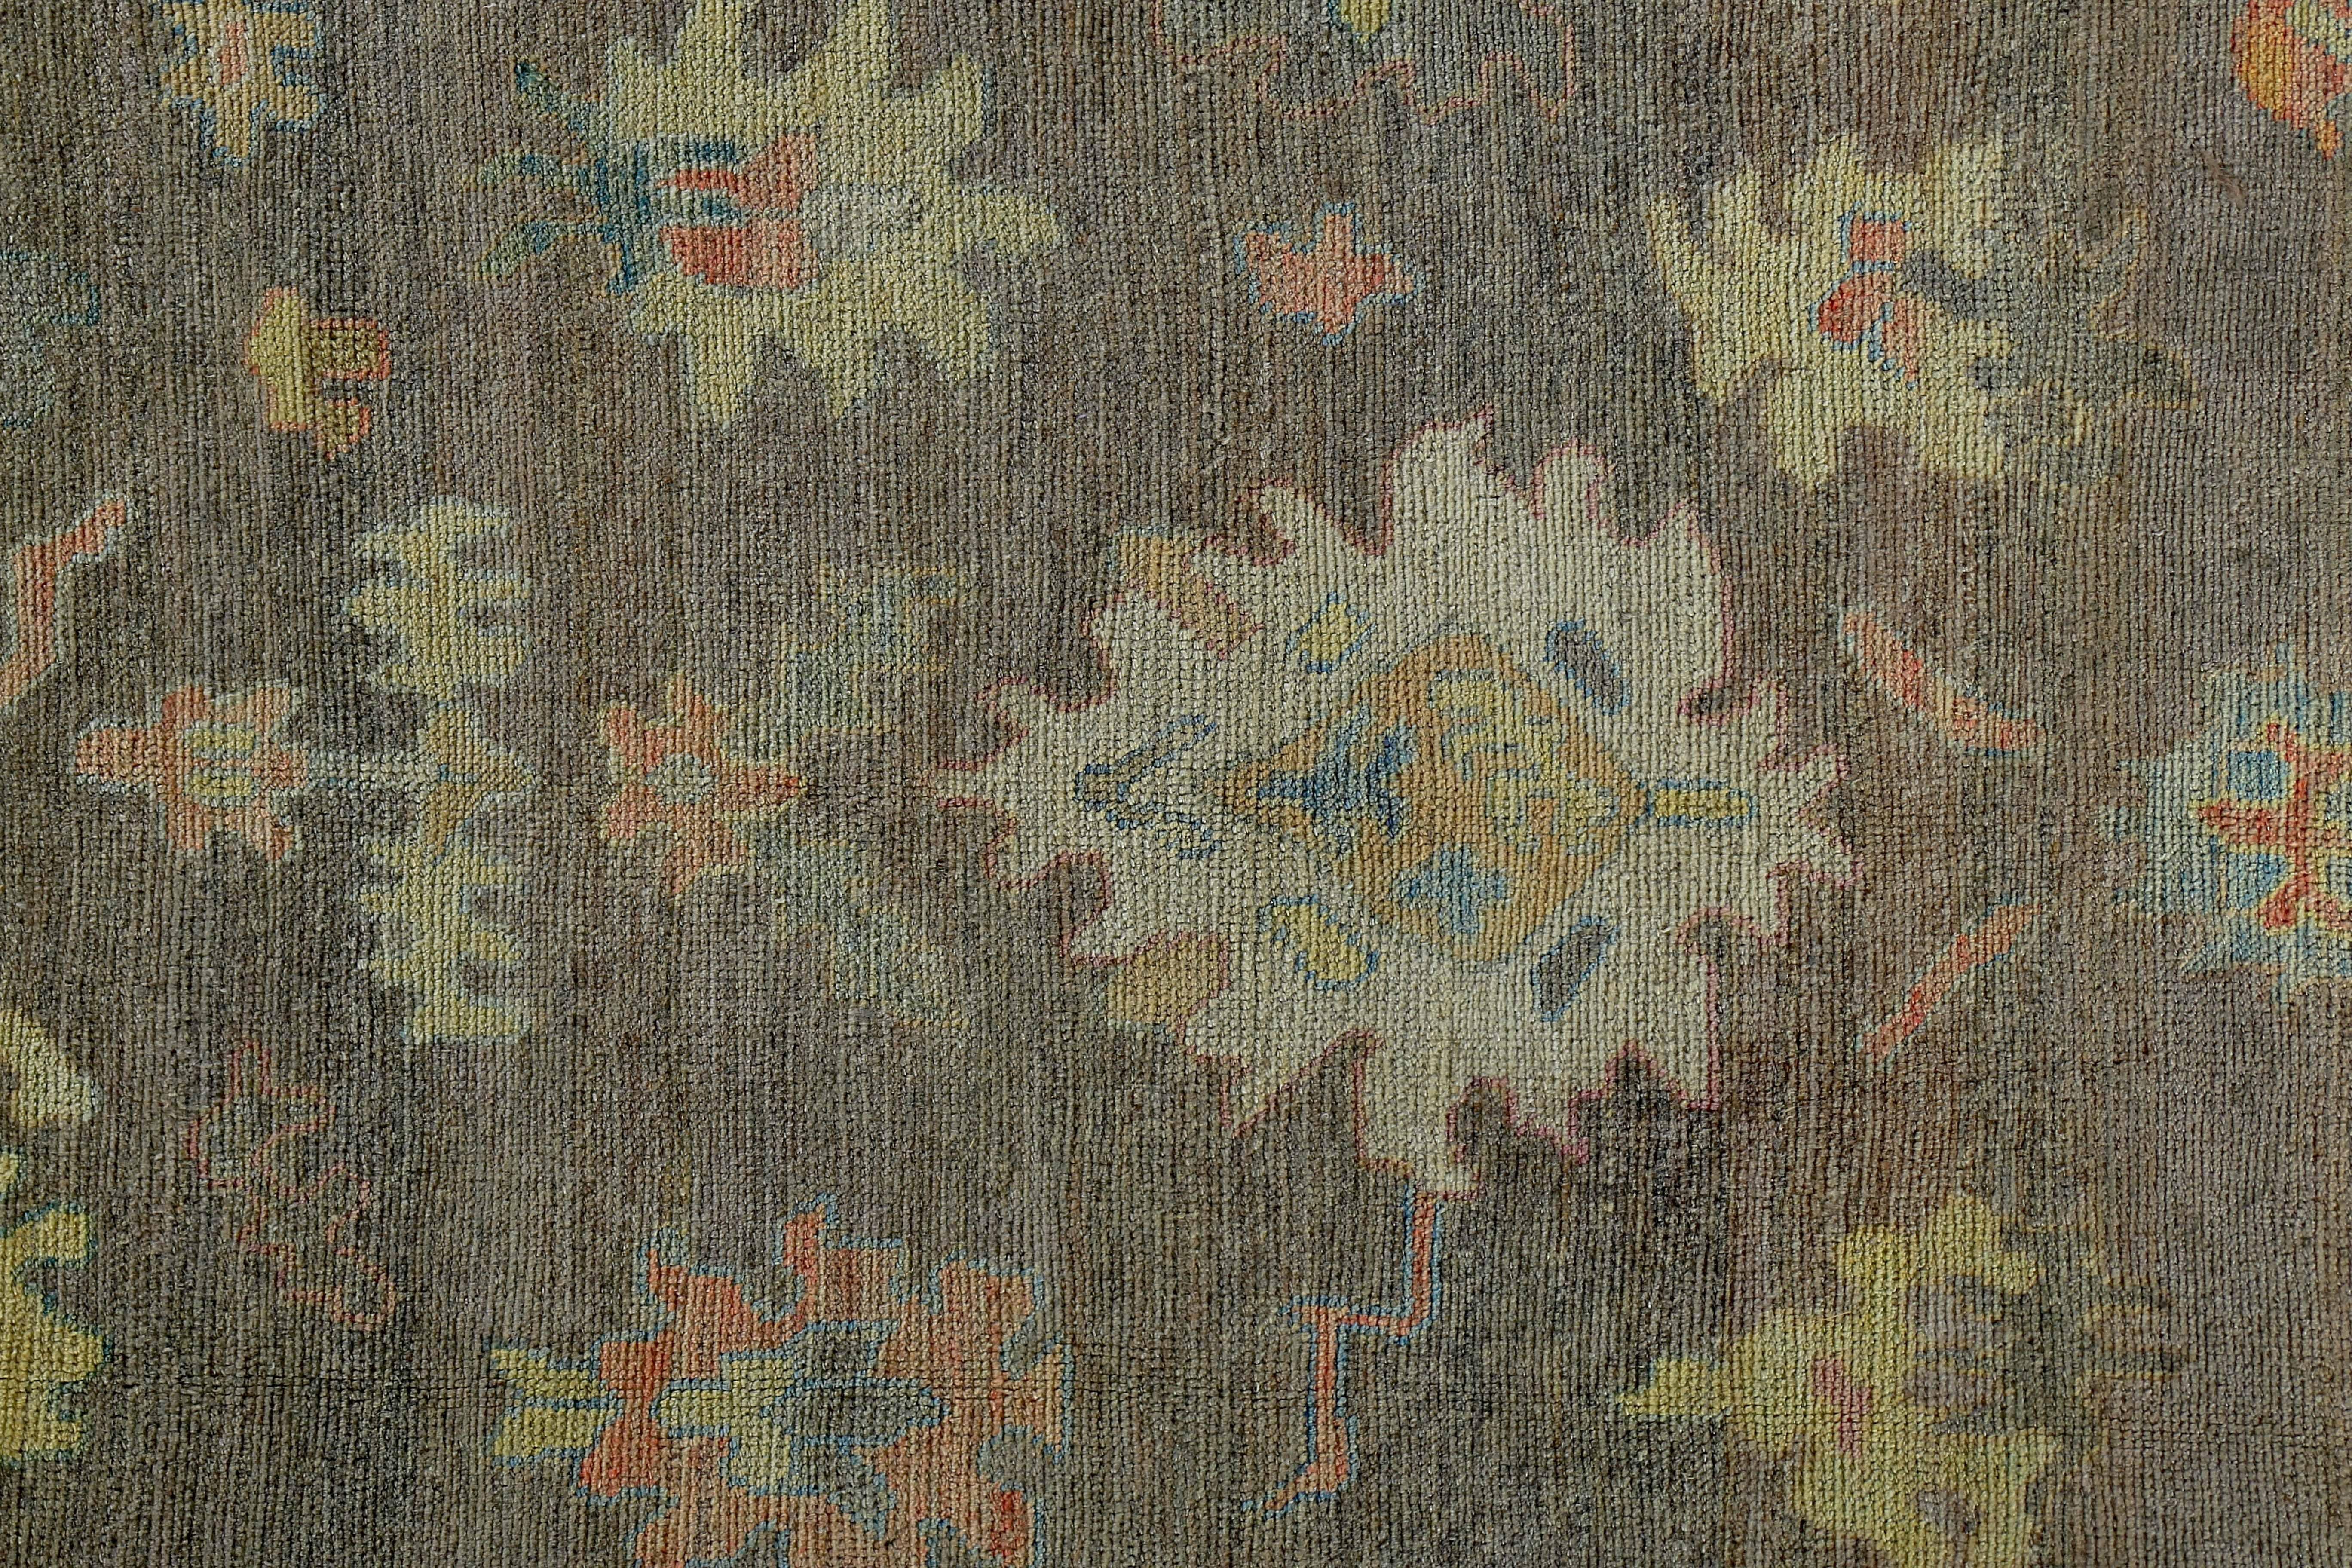 Hand-Woven New Turkish Oushak Rug with Bright Colored Flower Heads on Brown Field For Sale